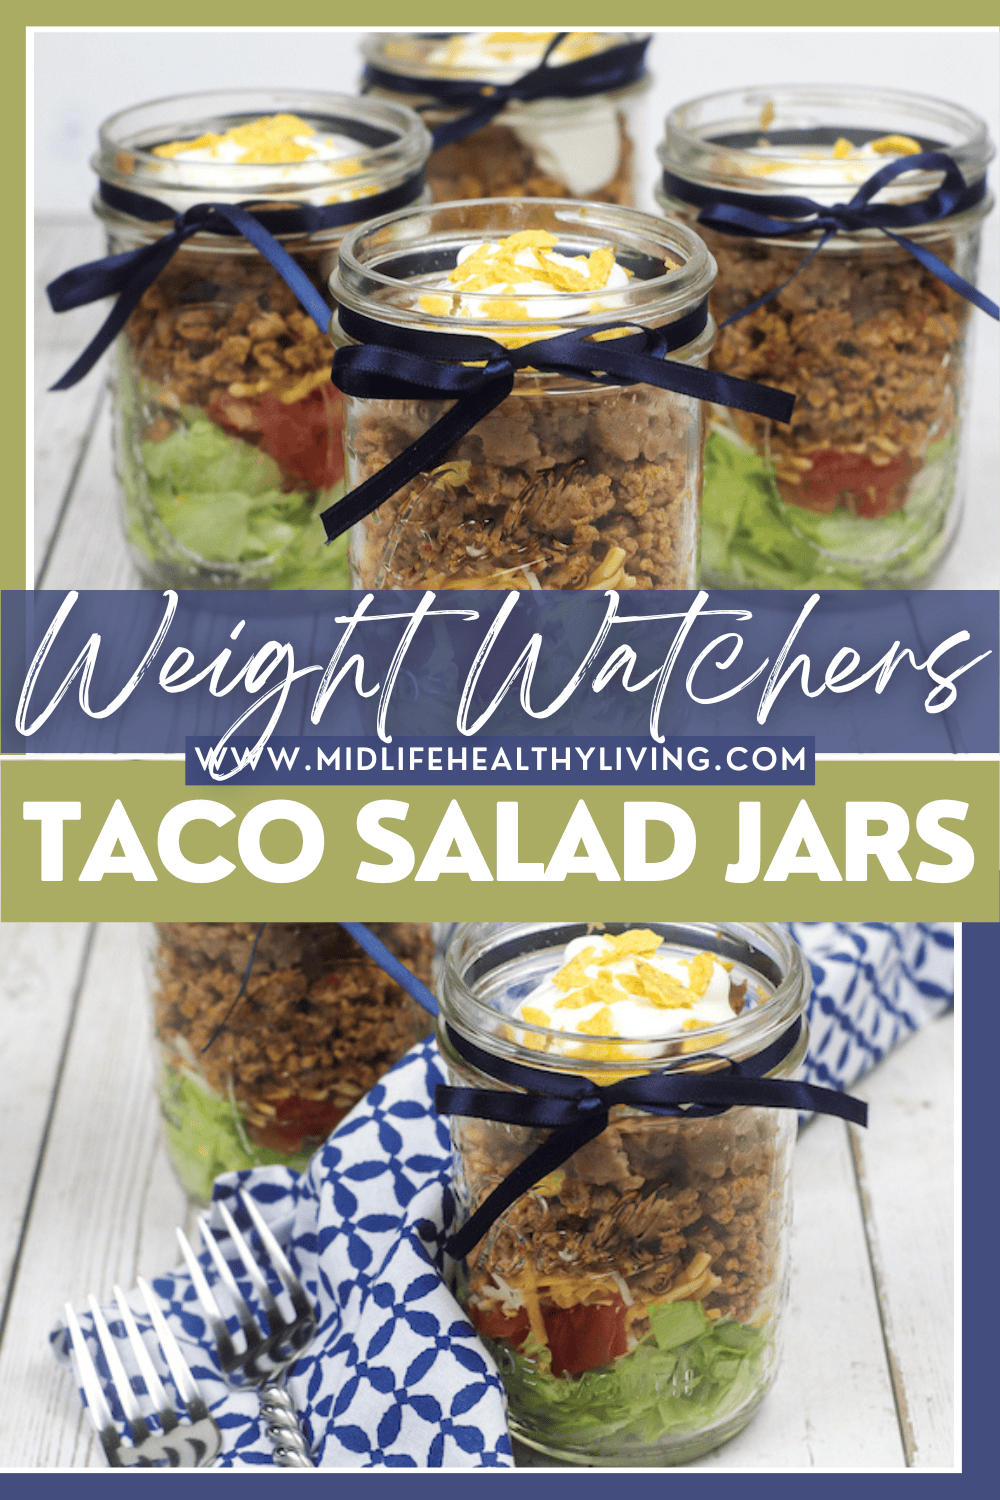 https://www.midlifehealthyliving.com/wp-content/uploads/2021/03/Taco-Salad-In-A-Jar-Recipe-Pin.png